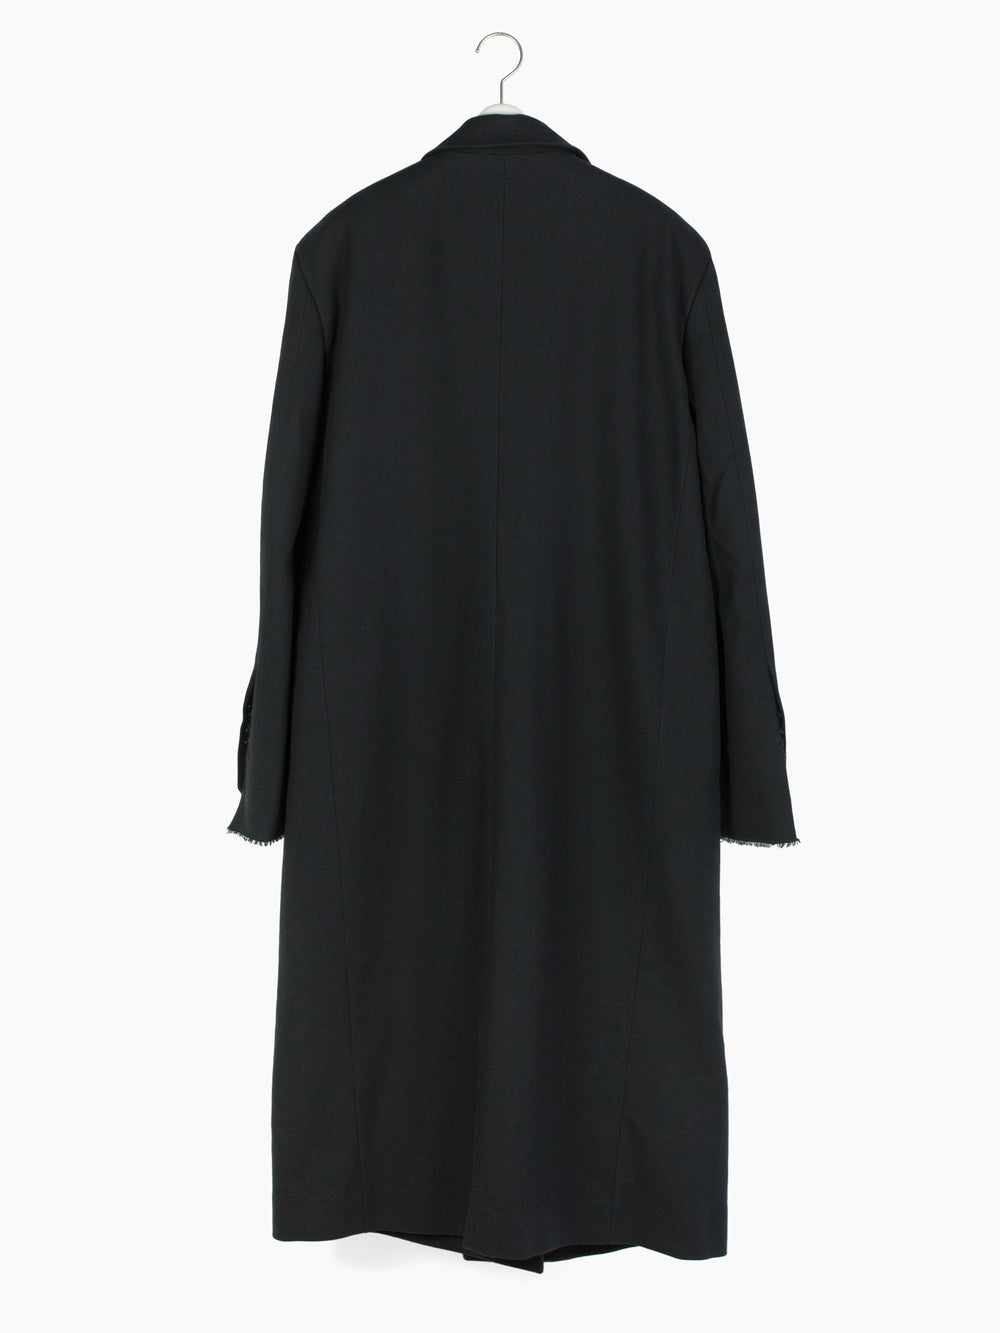 Vetements AW14 Archive (AW16) Cutoff DB Coat